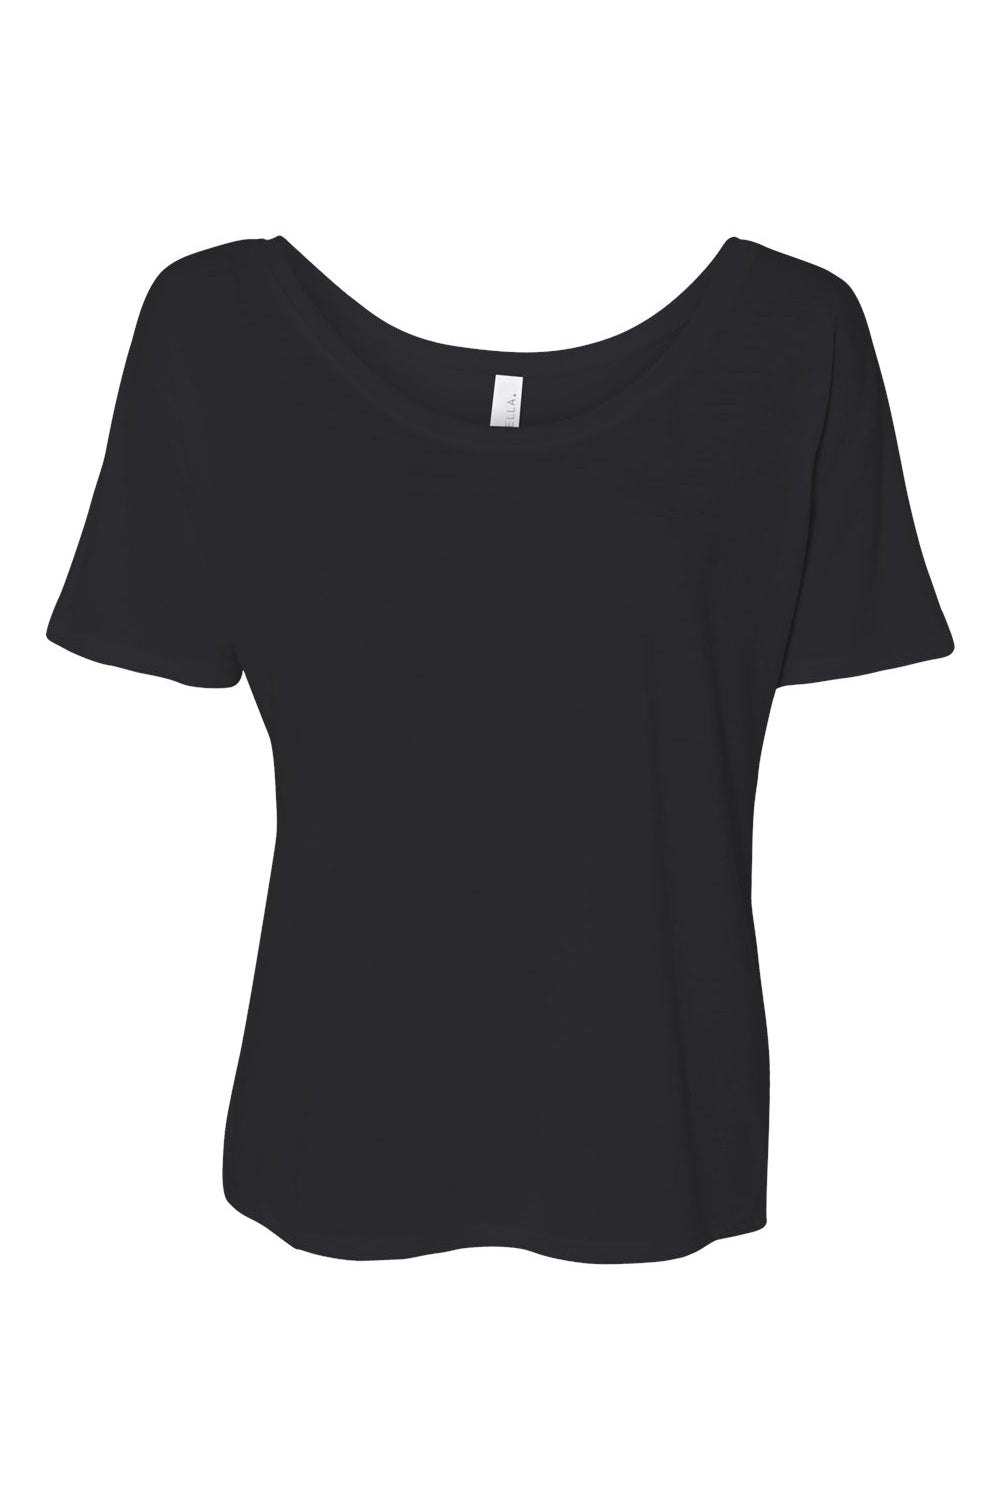 Bella + Canvas BC8816/8816 Womens Slouchy Short Sleeve Wide Neck T-Shirt Black Flat Front